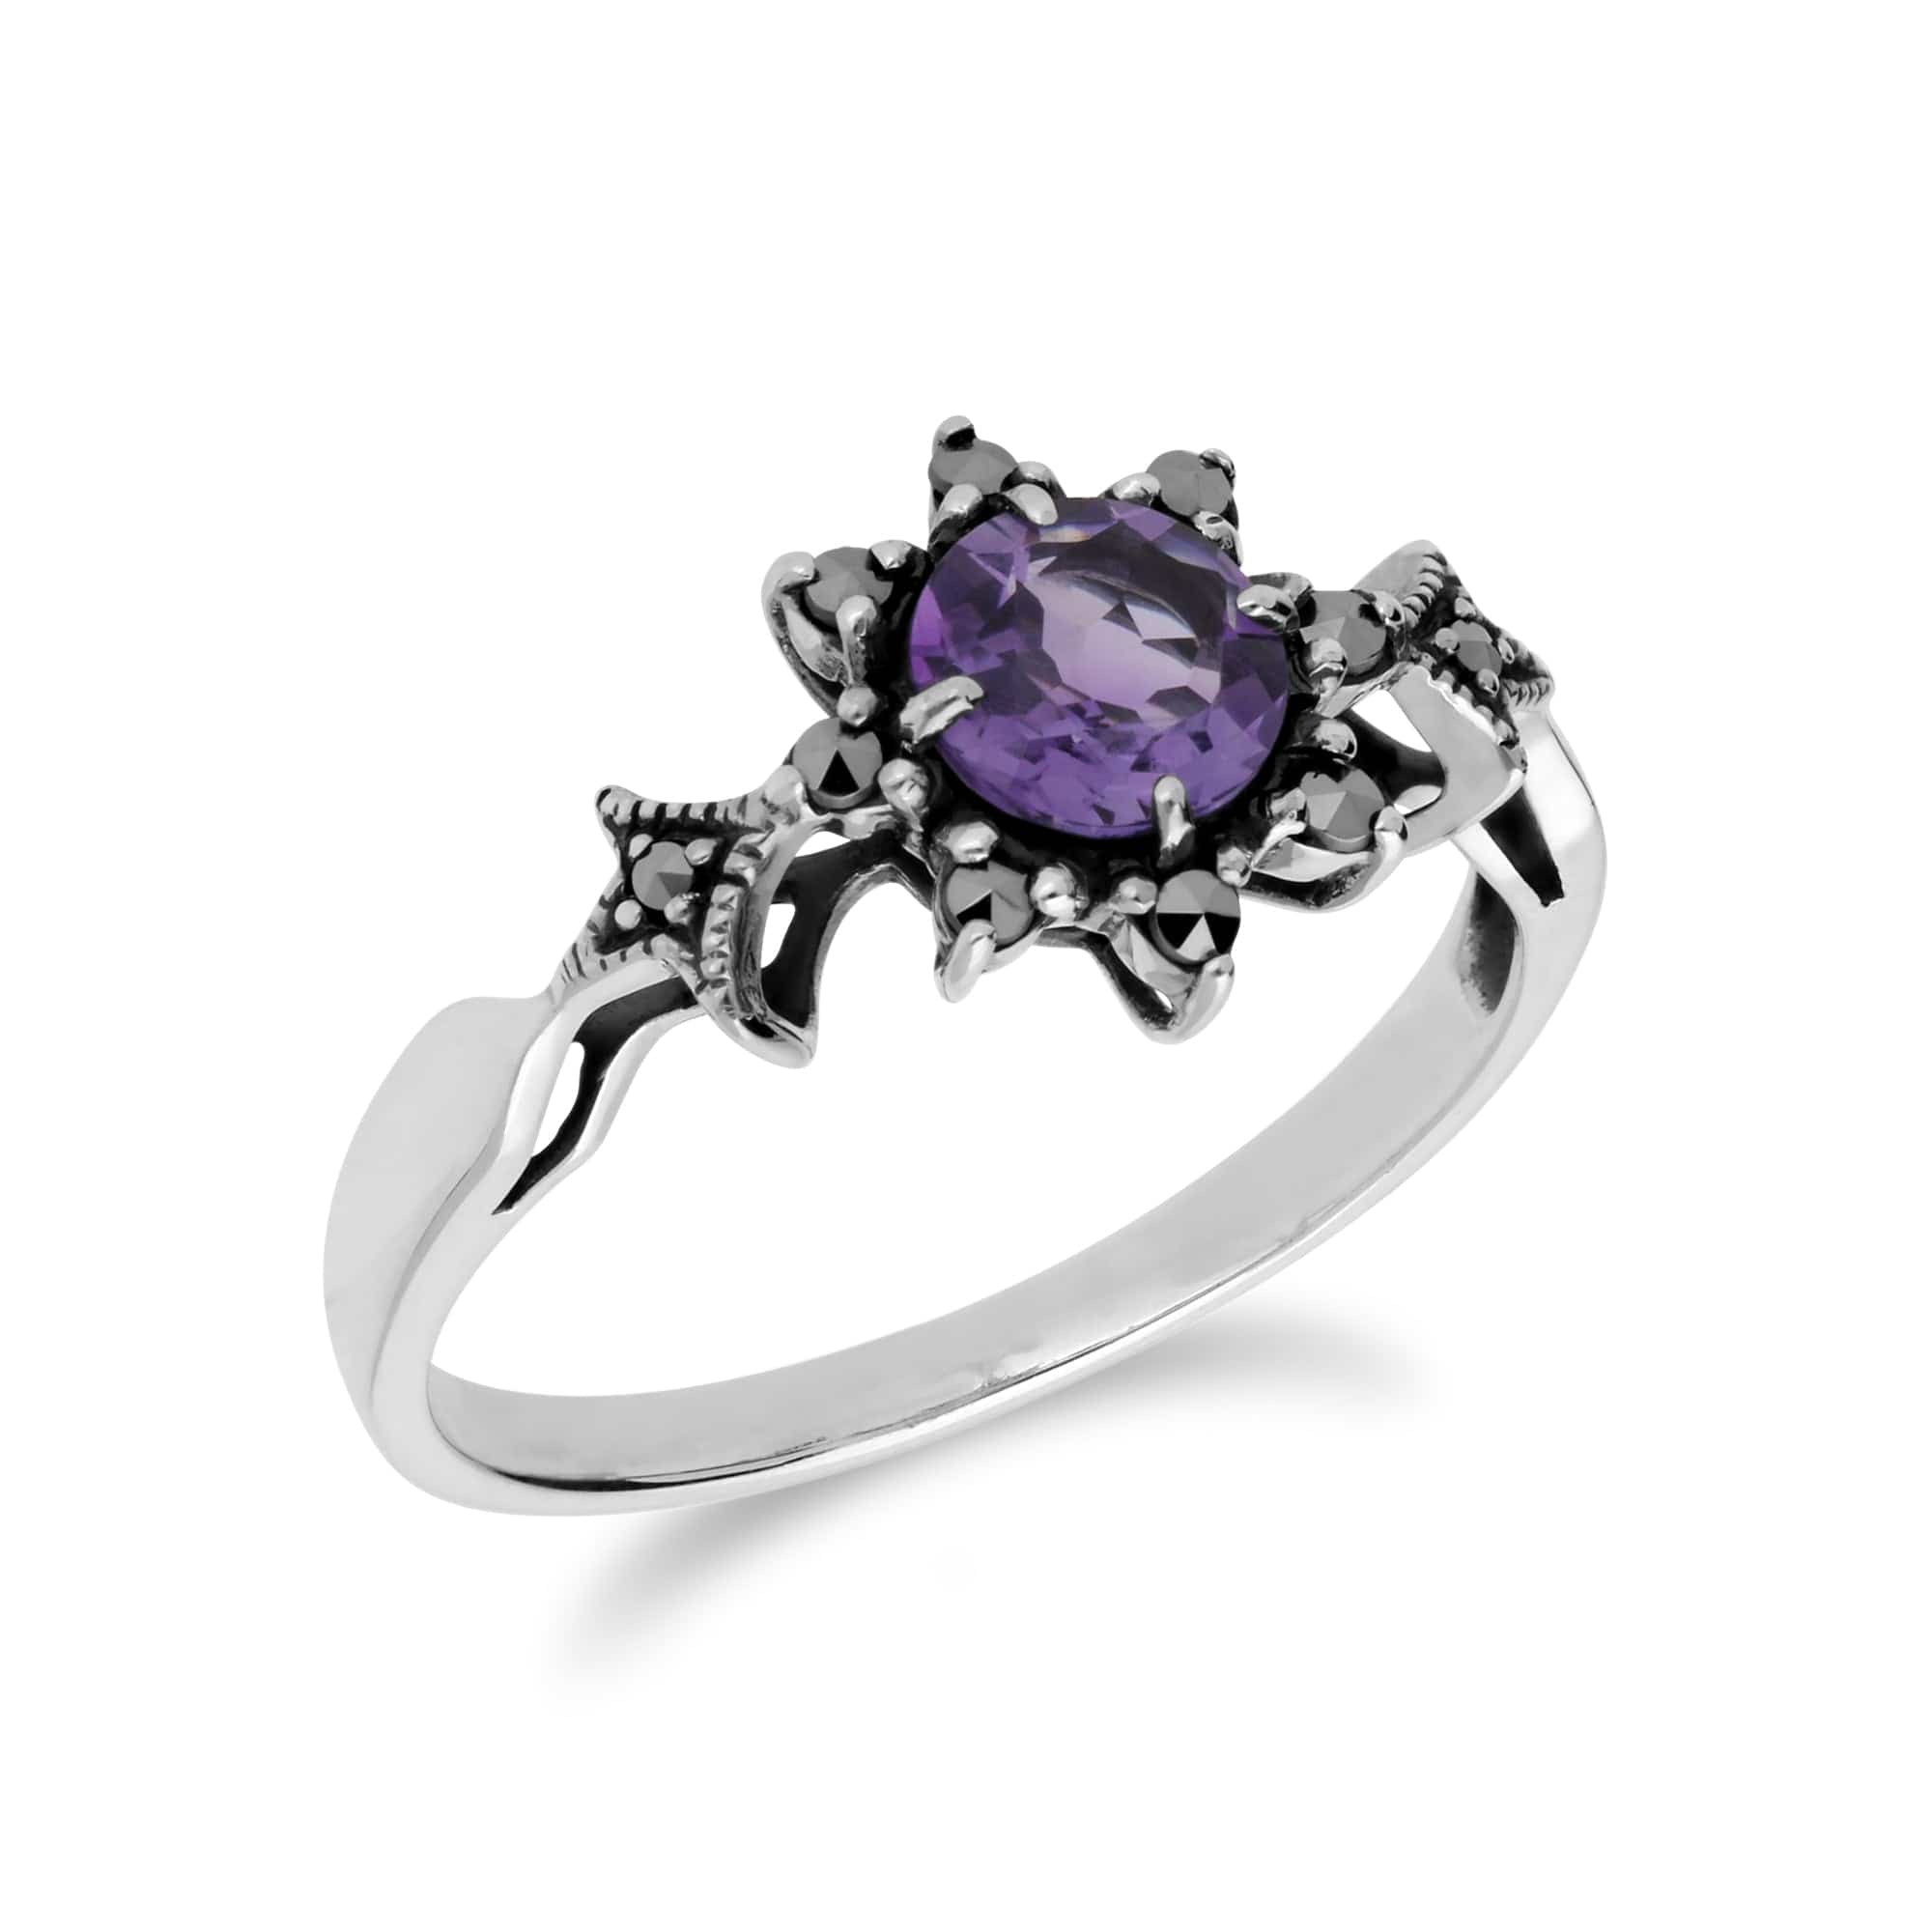 Art Nouveau Style Round Amethyst & Marcasite Floral Ring in 925 Sterling Silver - Gemondo